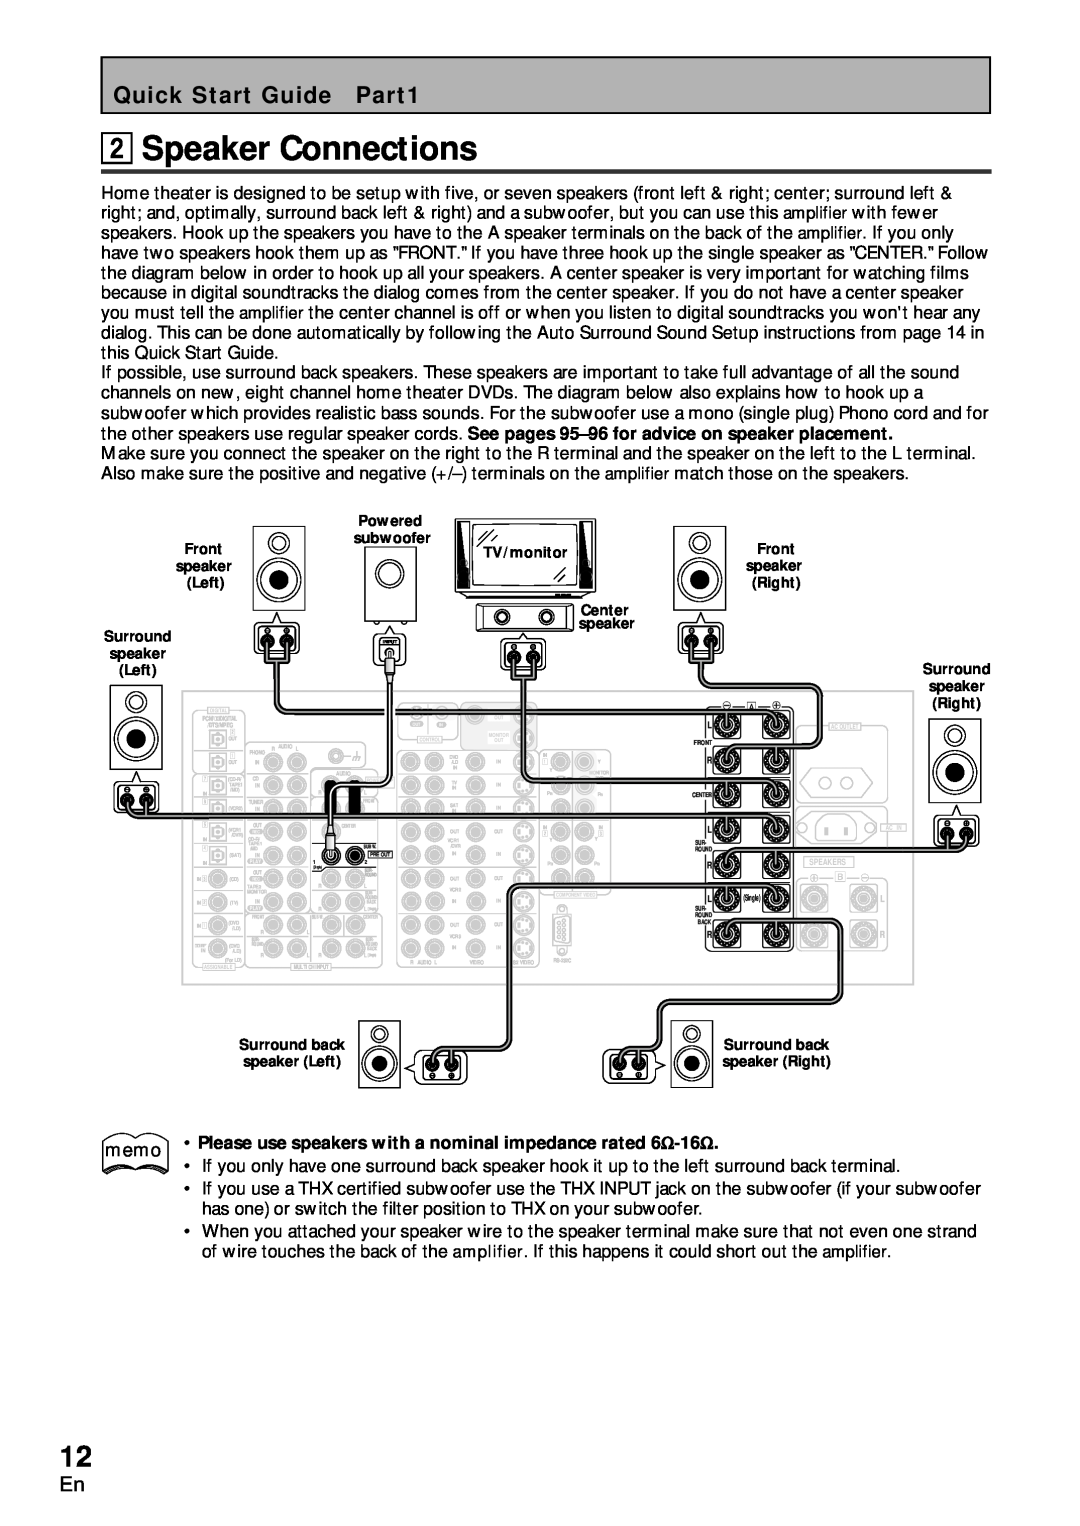 Pioneer VSA-AX10 operating instructions 2Speaker Connections, memo 